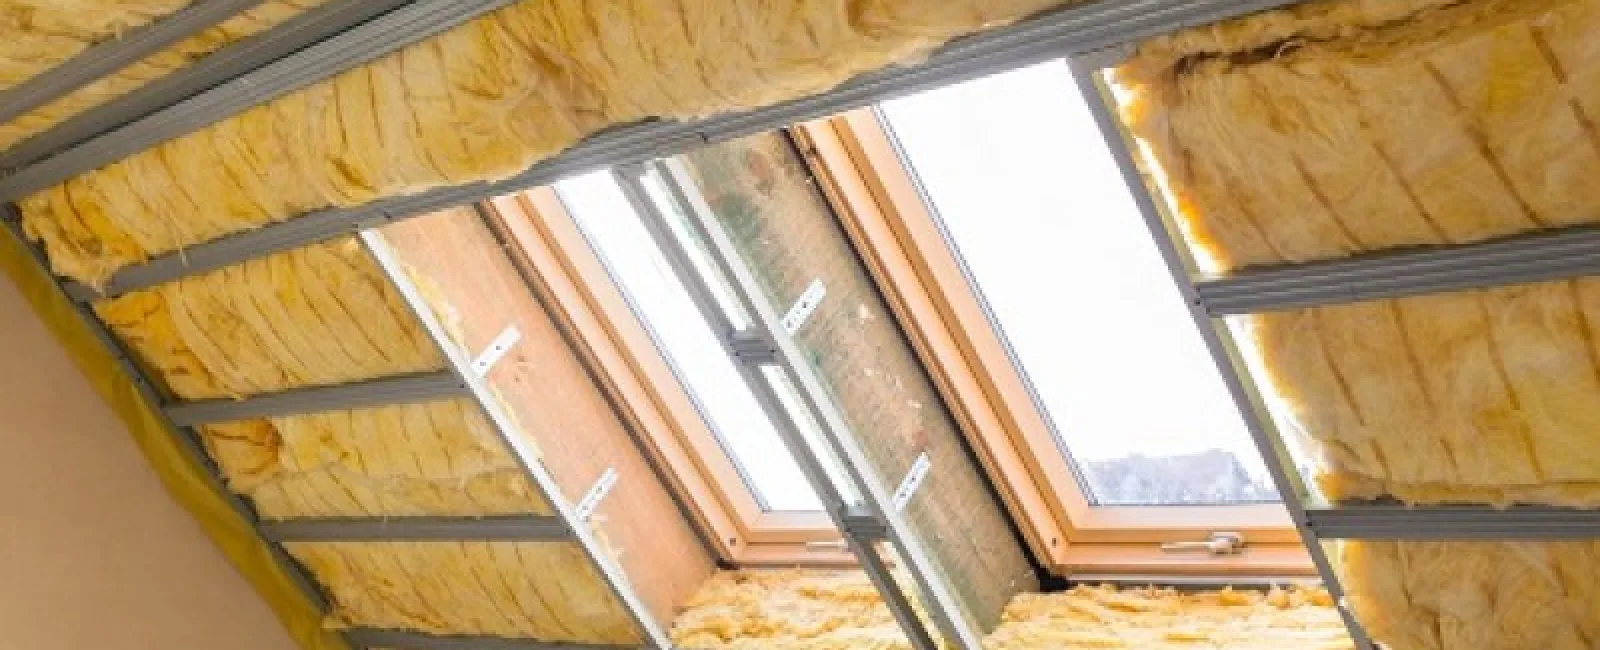 An Overview of Different Types of Attic Insulation